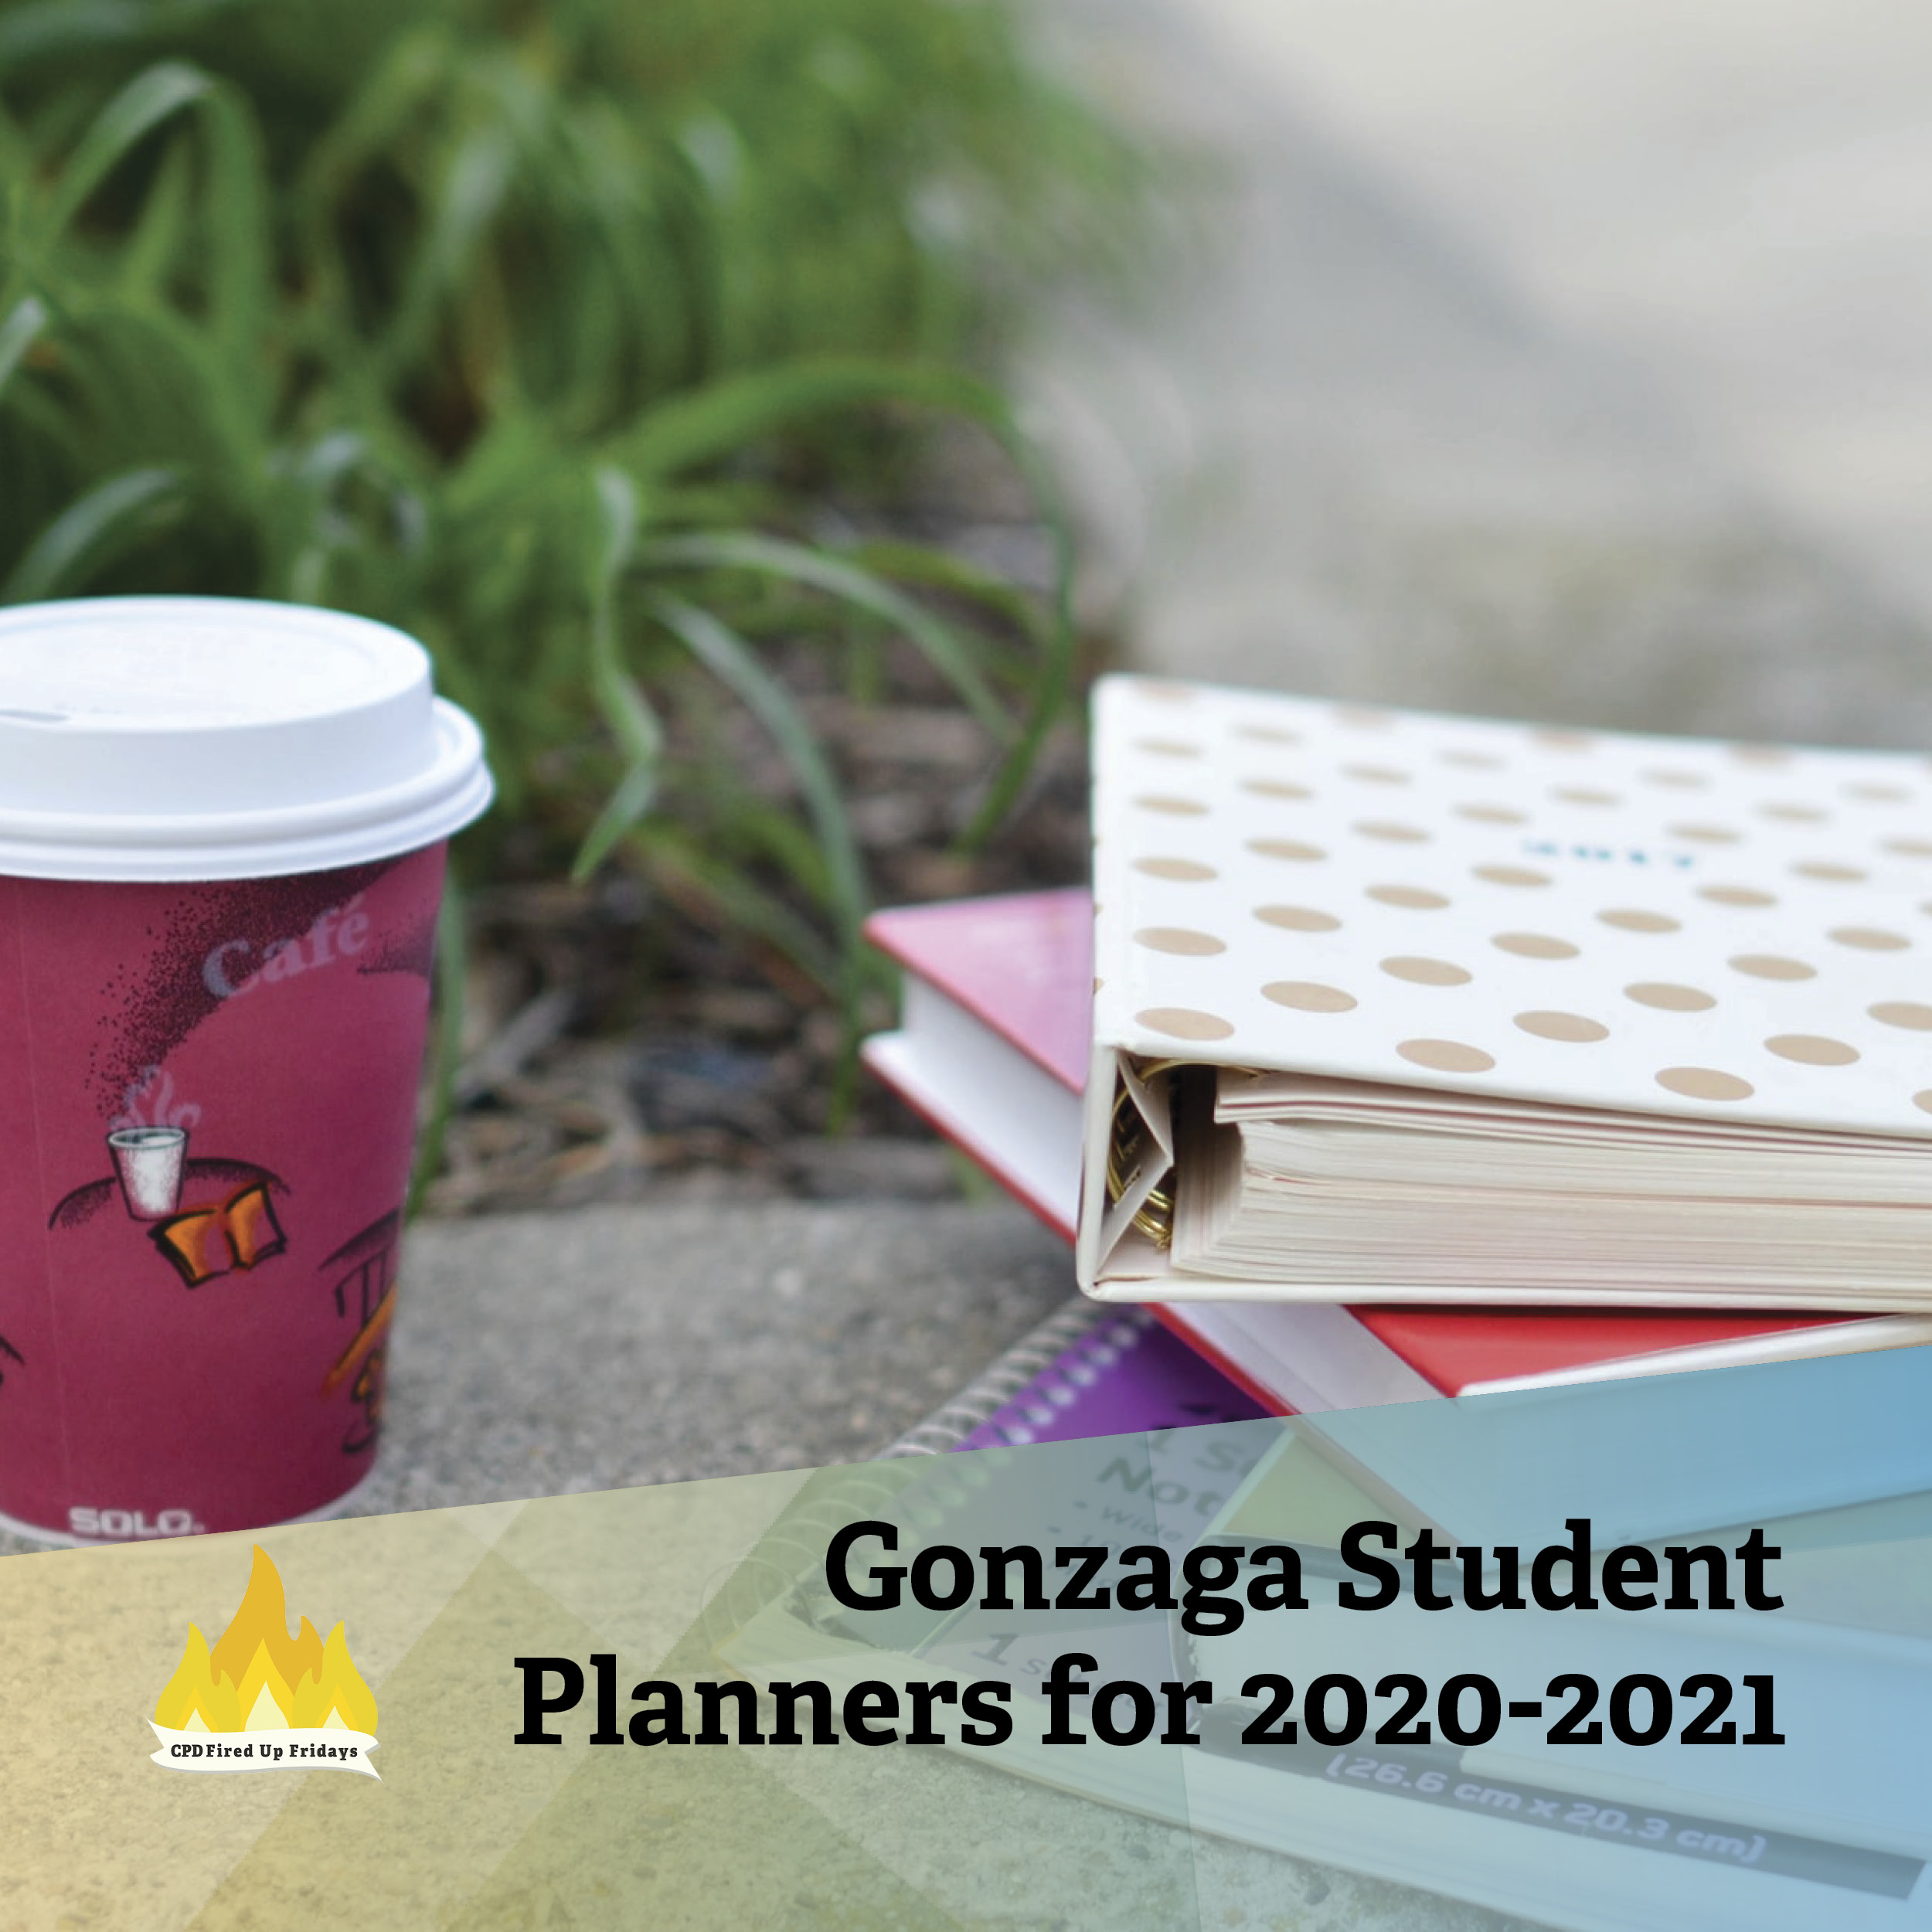 Photo of a stack of books and binders on the concrete corner of an outside planter box. A cup of coffee sits beside the stack. Underneath, text reads: 'Gonzaga Student Planners for 2020-2021'